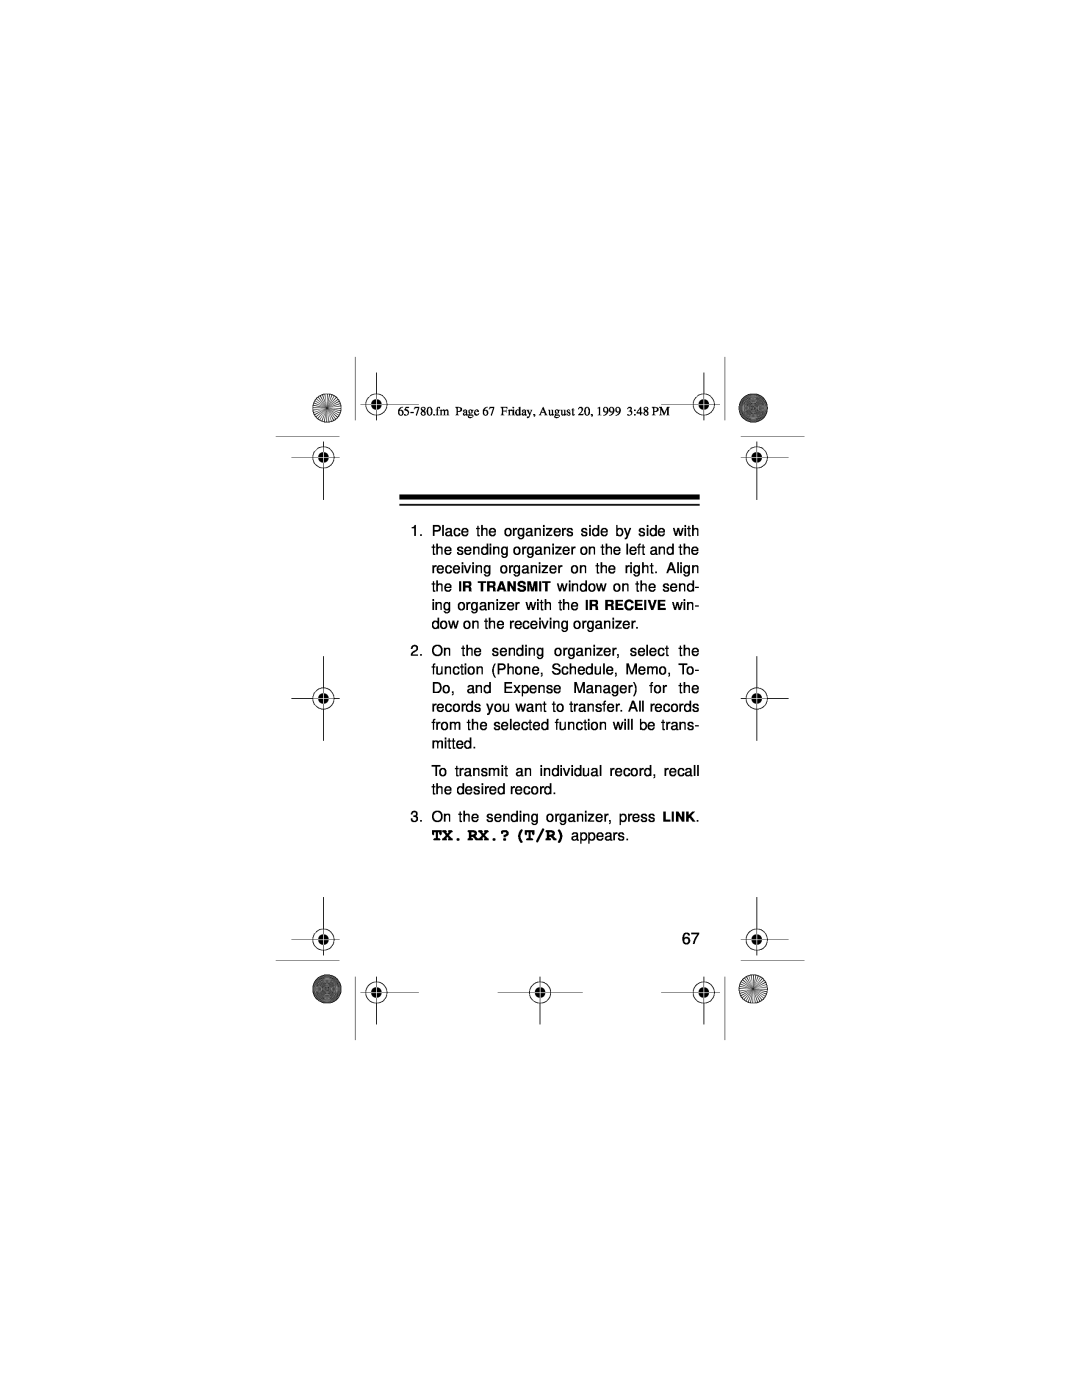 Samsung 256K owner manual TX. RX.? T/R appears 